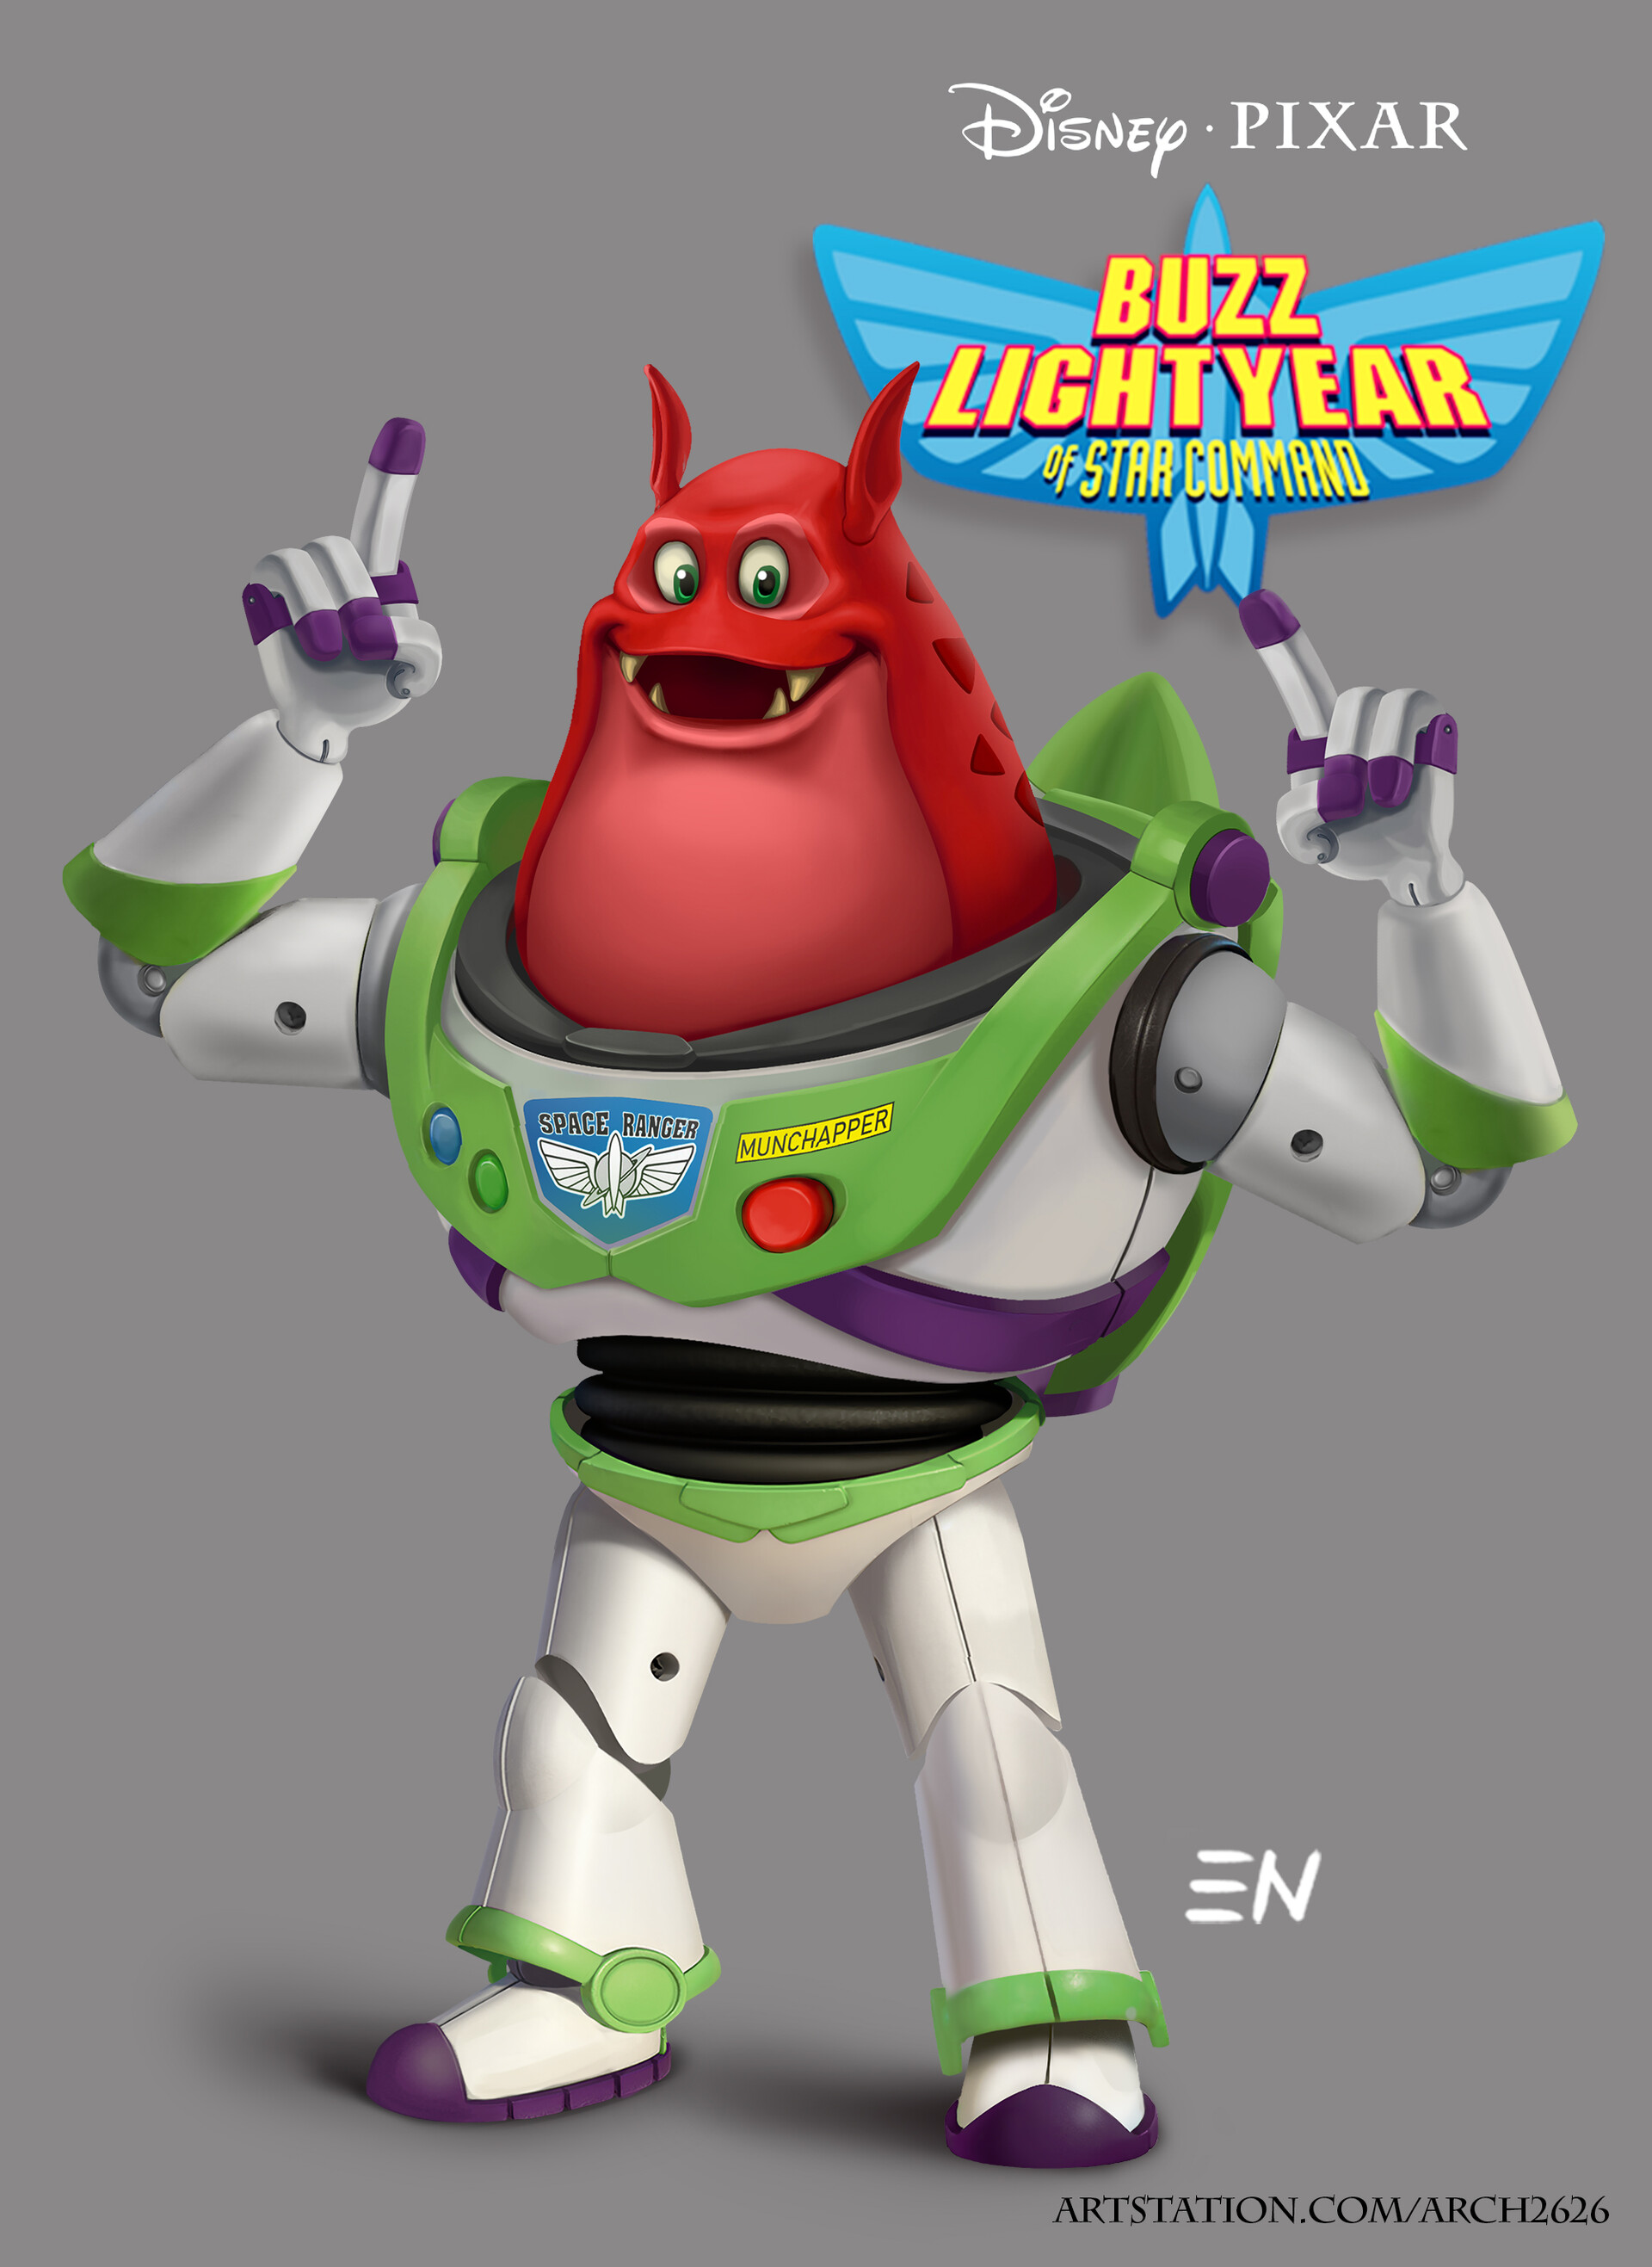 Booster buzz lightyear of star command